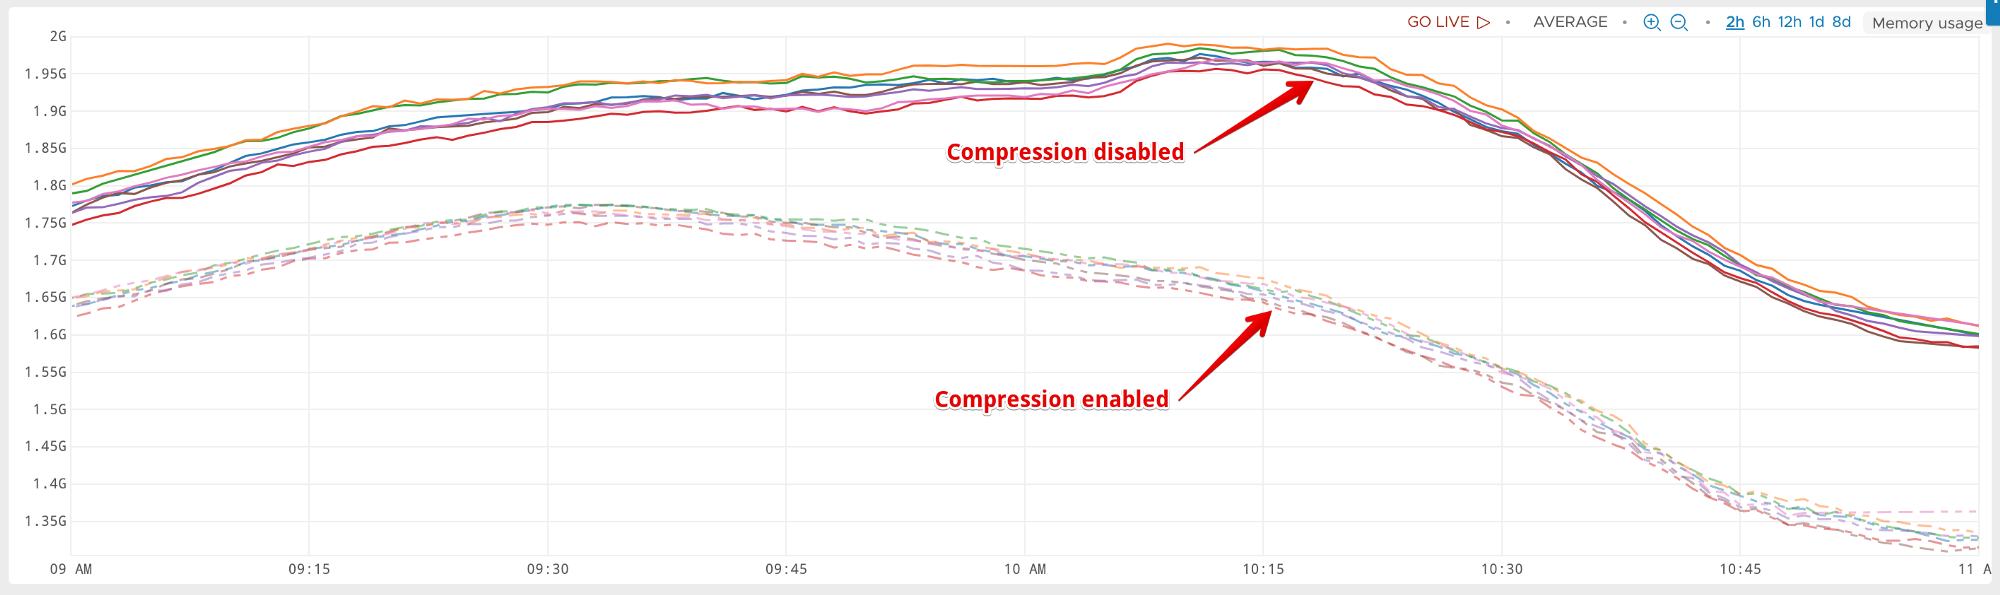 Redis memory usage with compression vs without compression